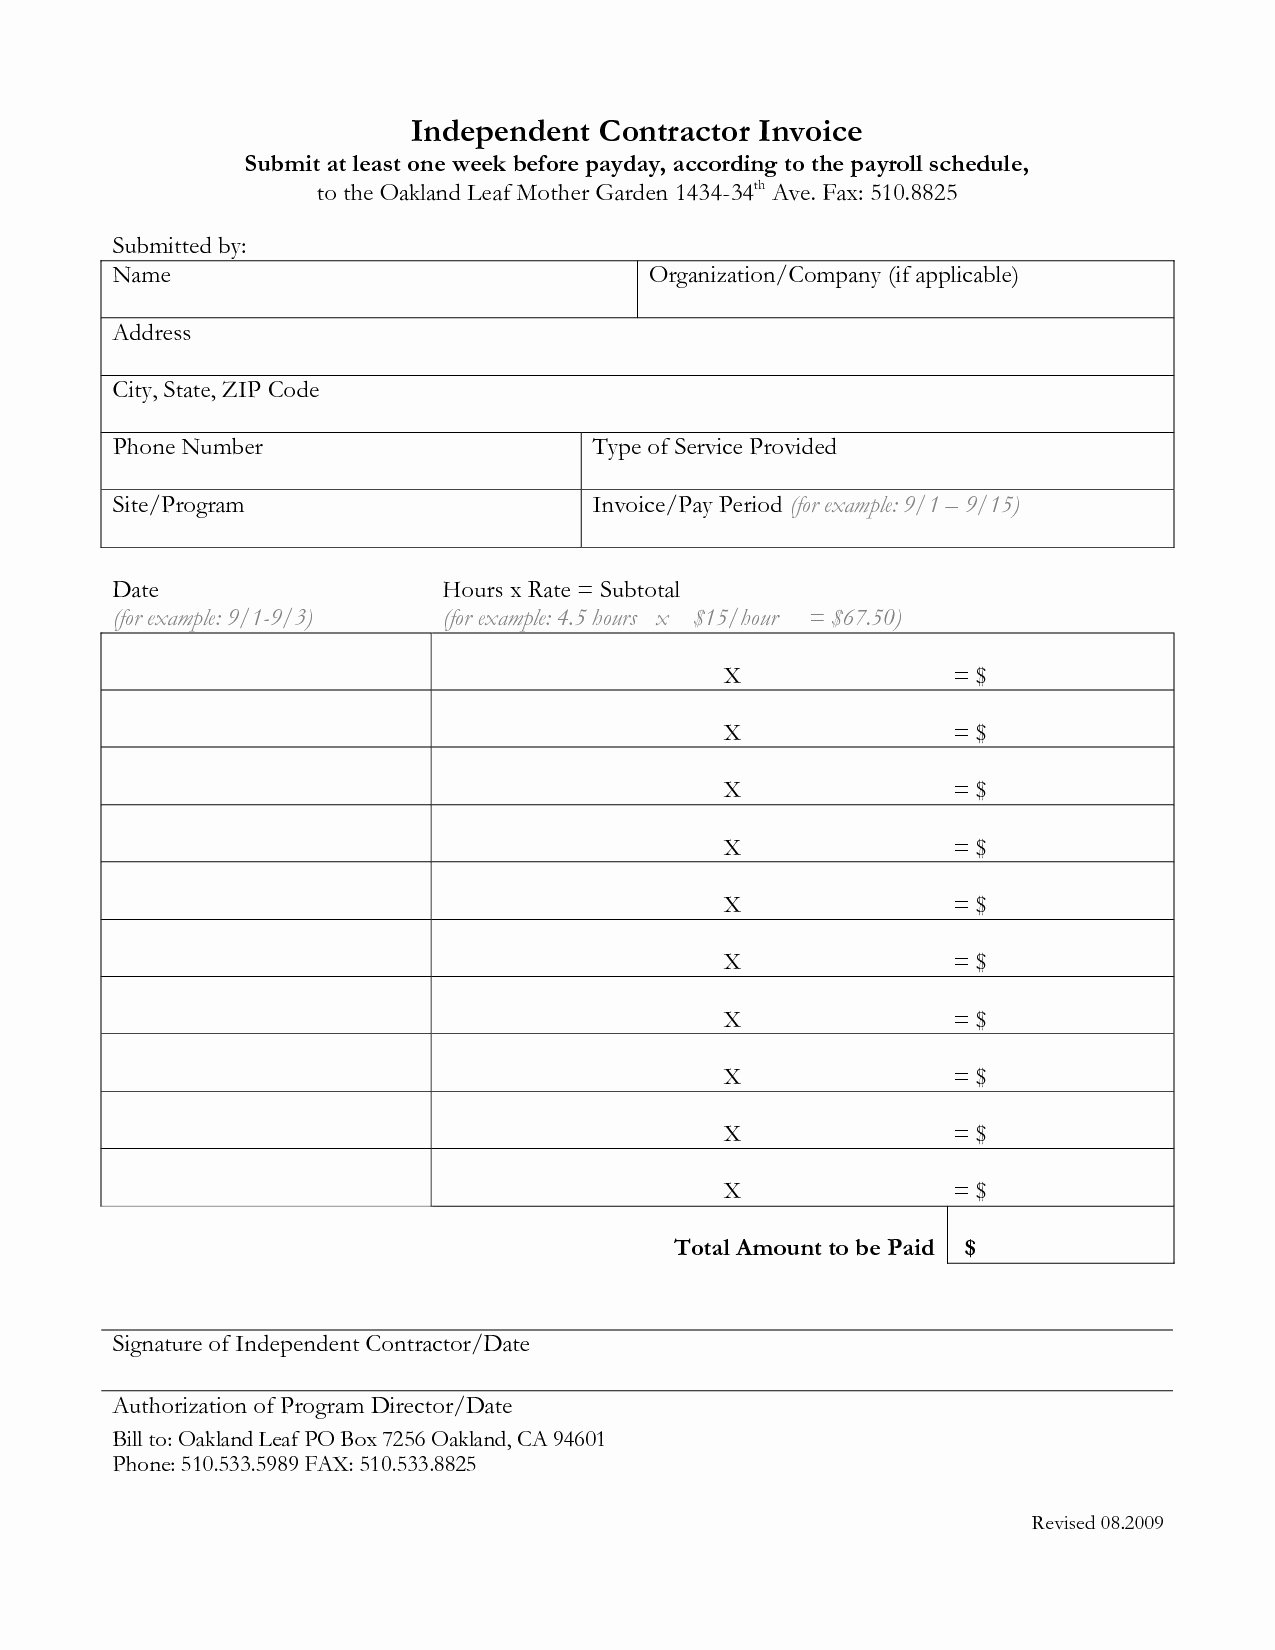 Contractor Invoice Template Free Beautiful Independent Contractor Invoice Invoice Template Ideas